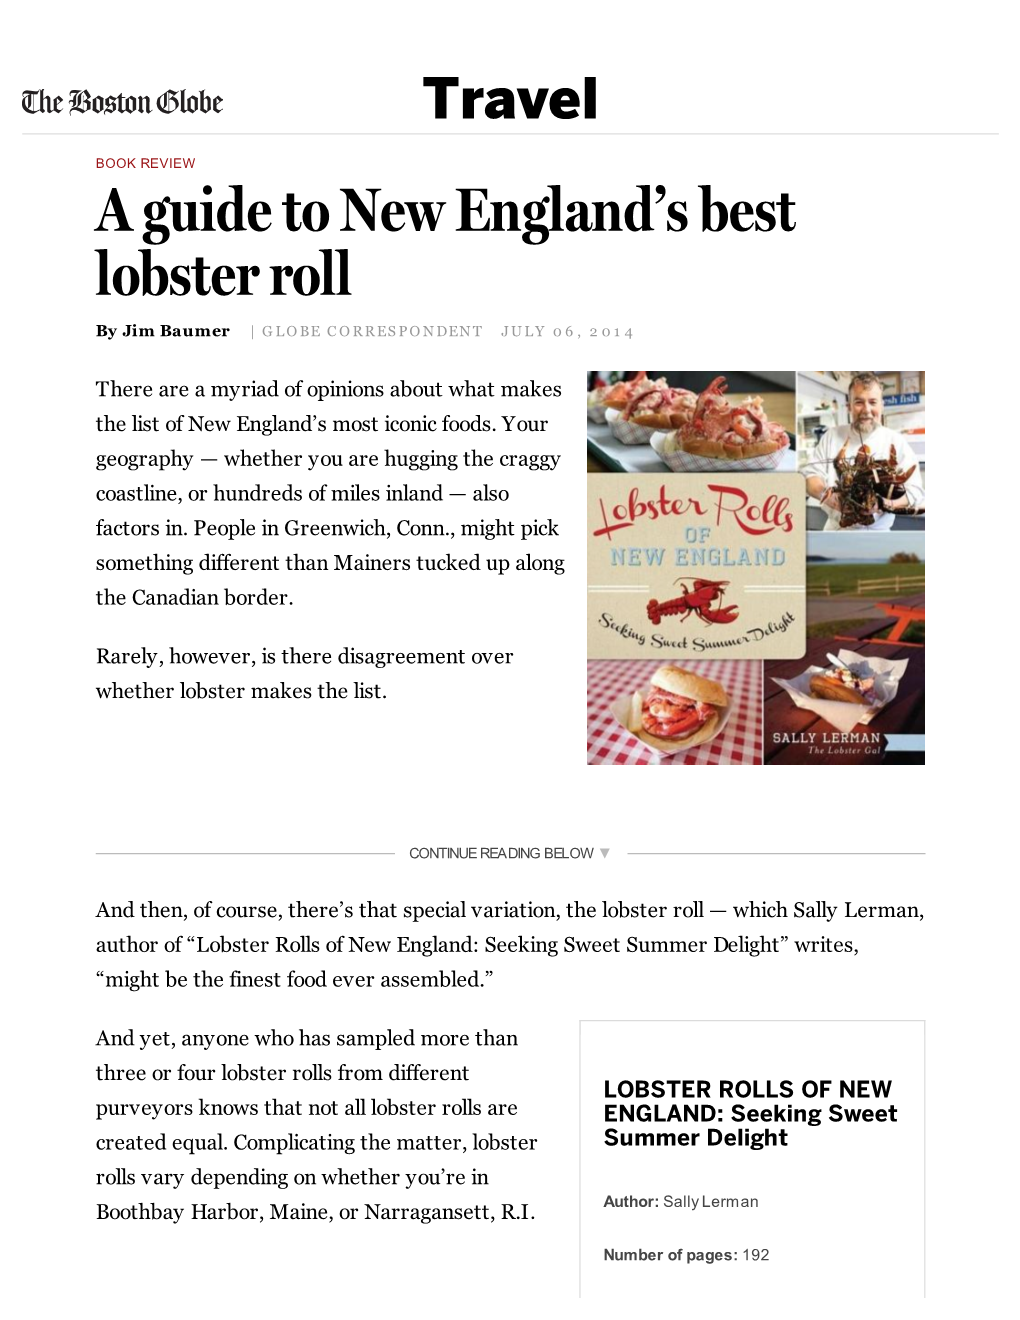 A Guide to New England's Best Lobster Roll